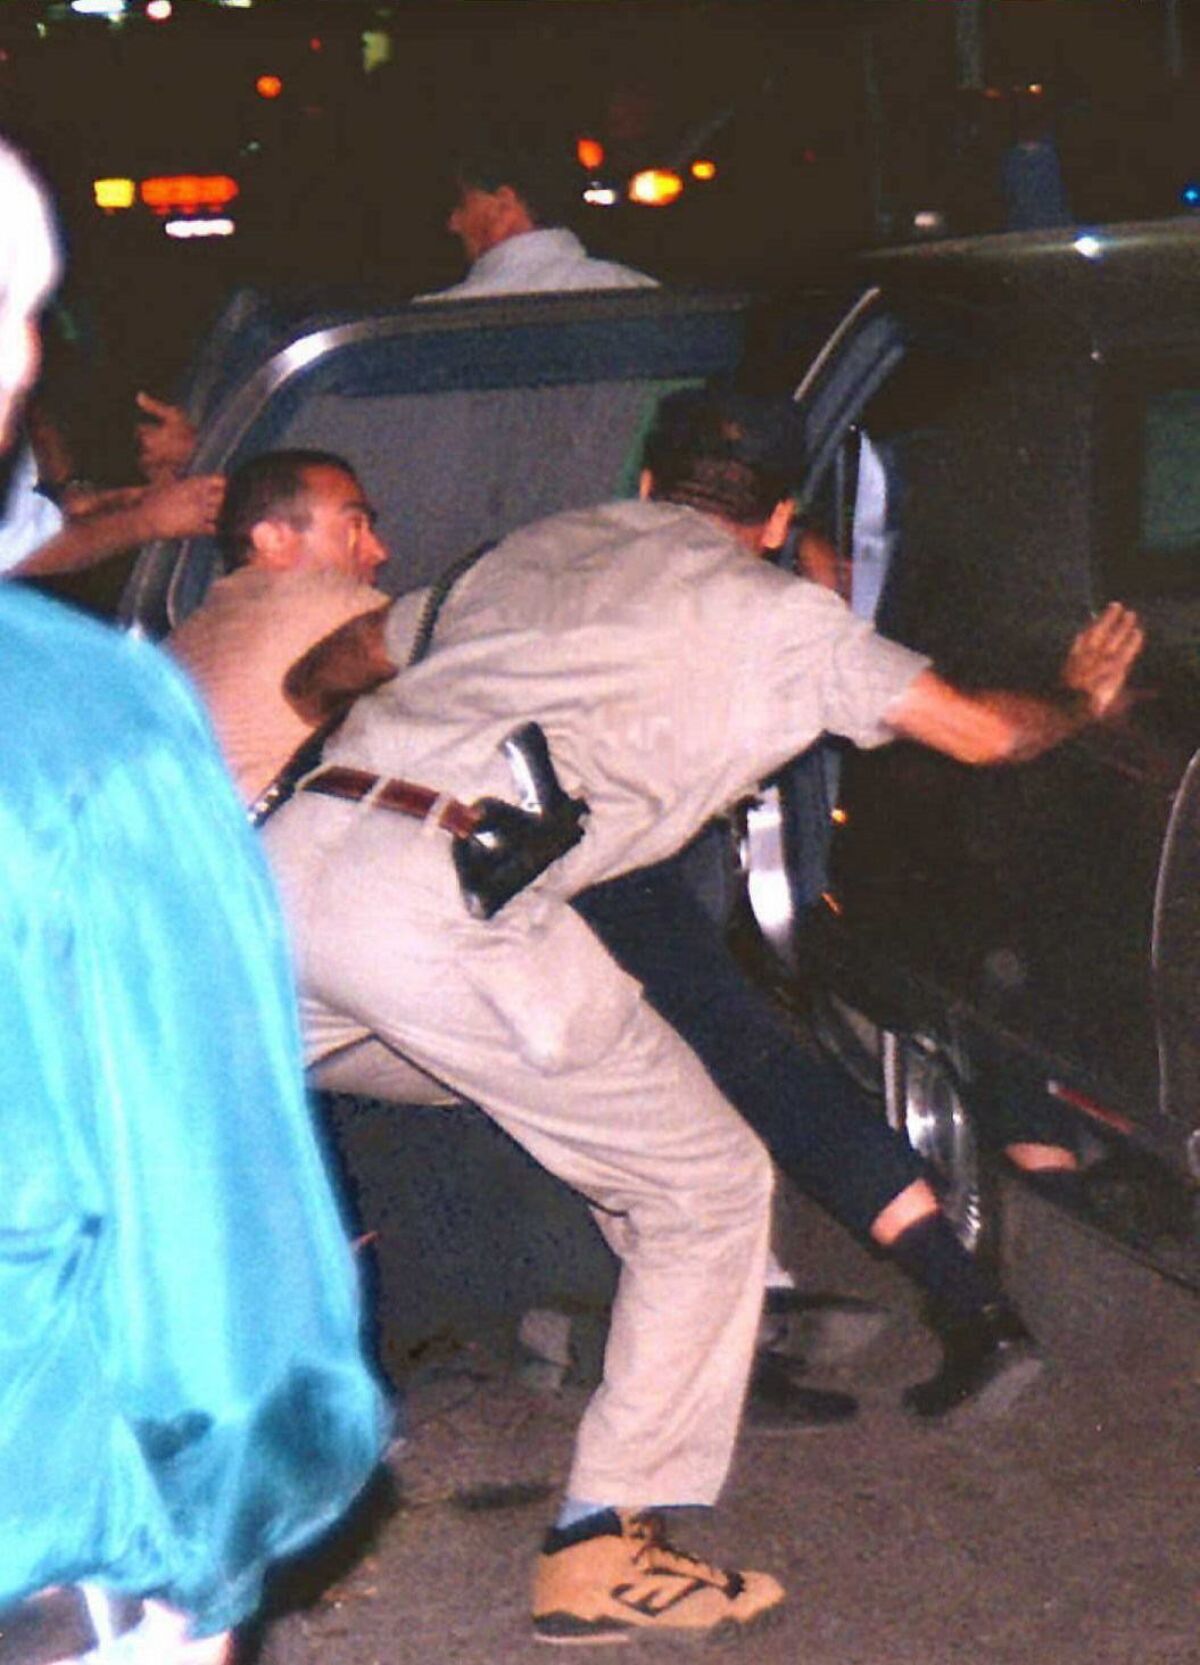 Israeli security personnel pushing Israeli Prime Minister Yitzhak Rabin into a car after he was shot an assassin in Tel Aviv on Nov. 4, 1995.